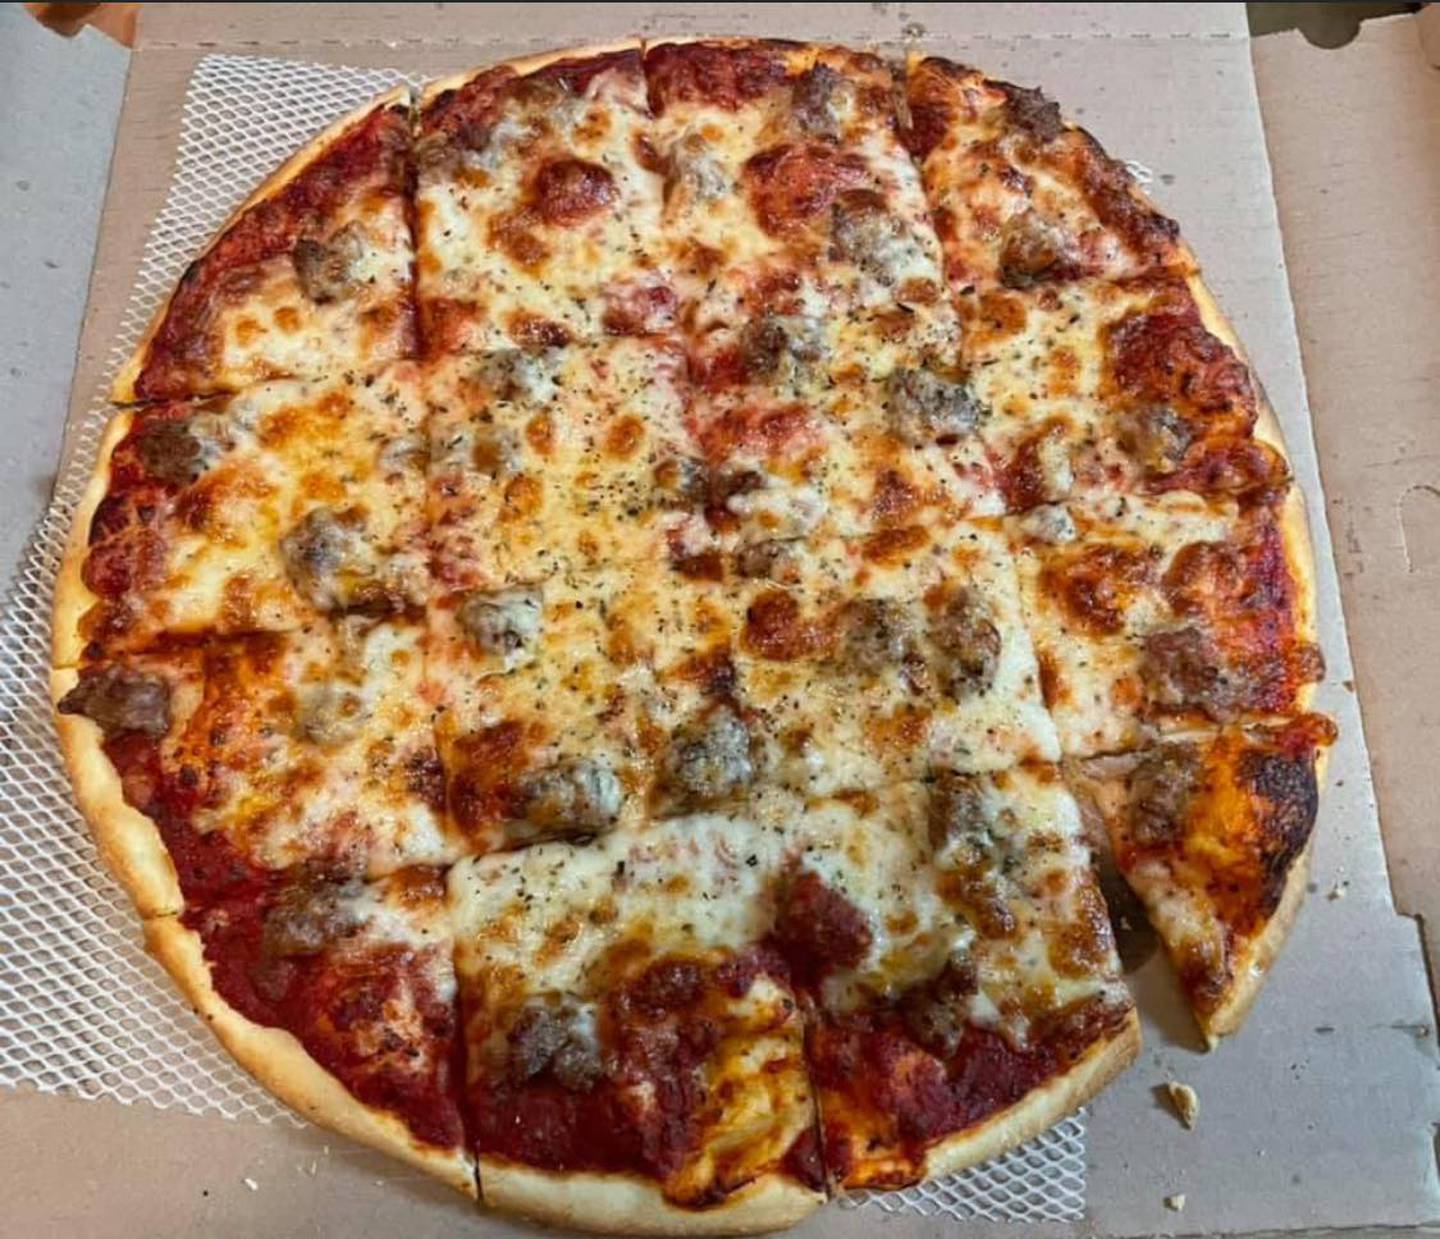 Big Chill & Grill was in the top 10 best pizza places in Will County by readers in 2021. (Photo from Big Chill & Grill Facebook page)